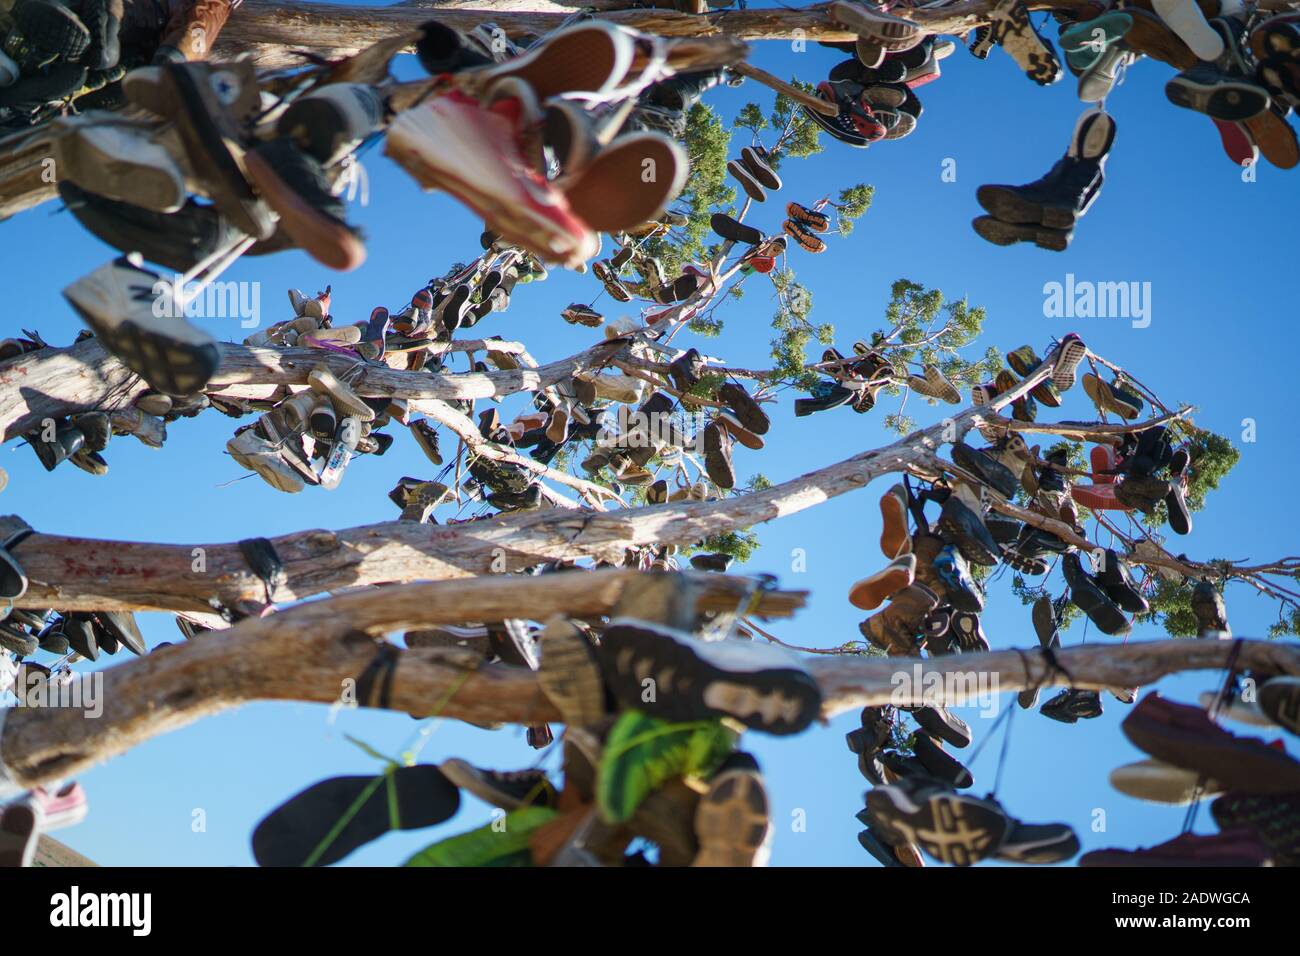 Shoe Tree at Hallelujah Junction on Highway 395, south of Susanville, California, north of Reno, Nevada. Stock Photo